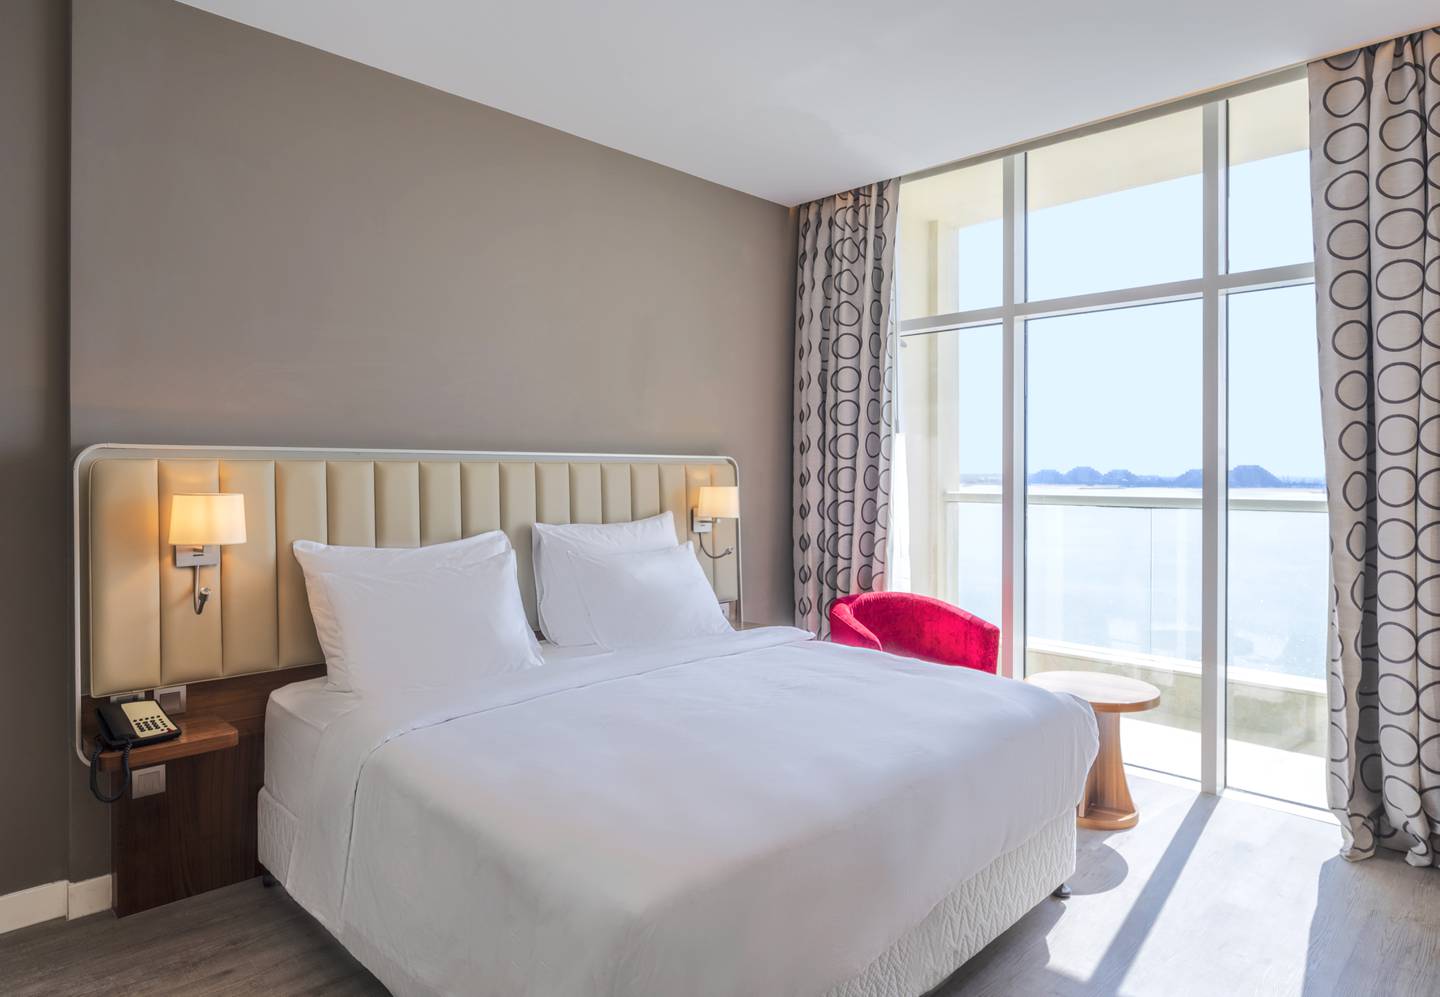 A one-bedroom suite with a sea view and balcony at Radisson Resort Ras Al Khaimah Marjan Island. Photo: Supplied